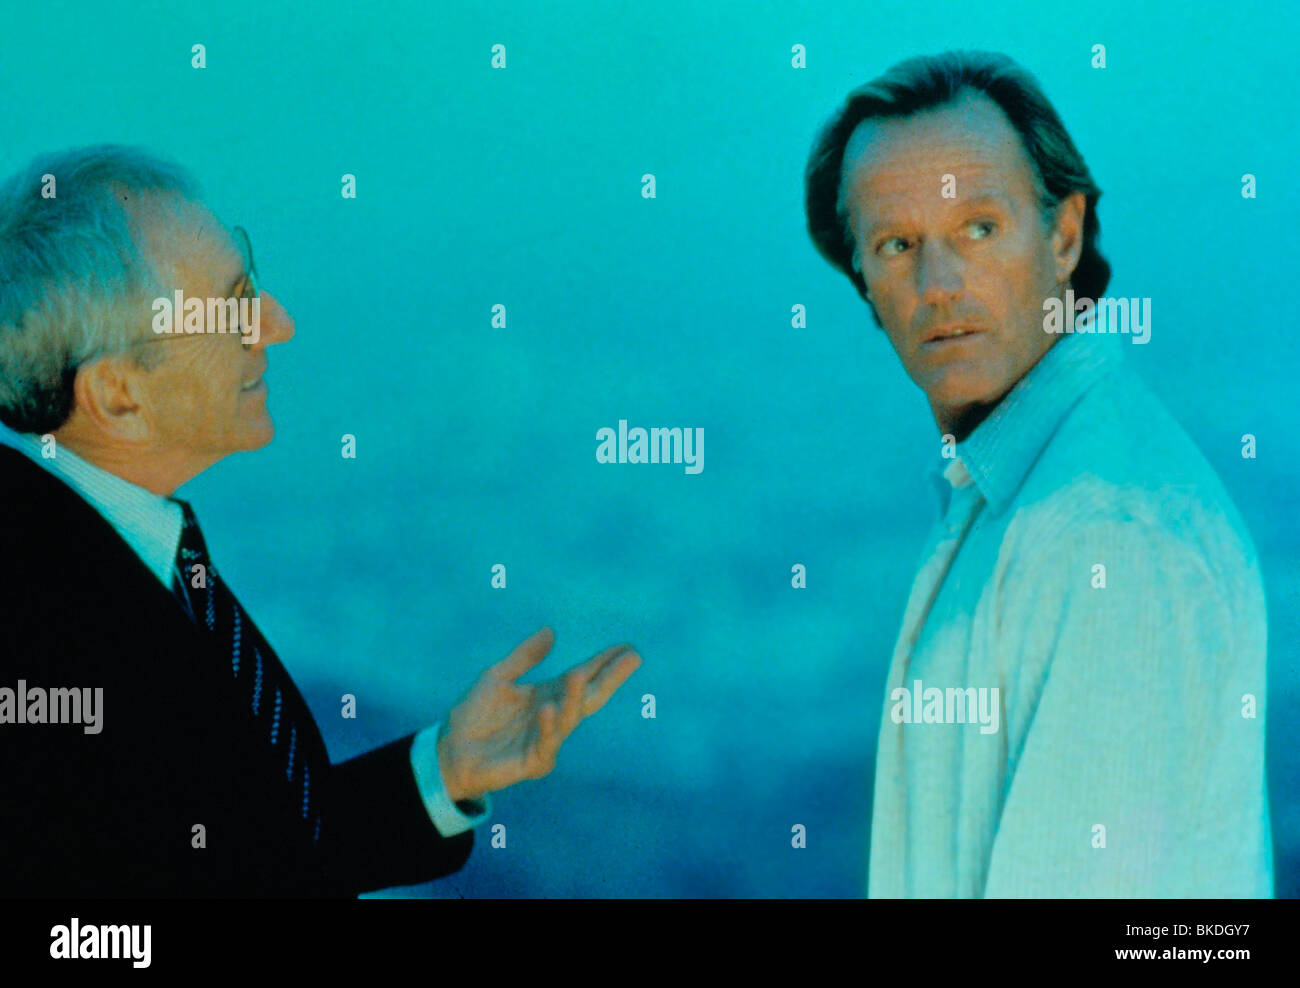 THE LIMEY (1999) BARRY NEWMAN, PETER FONDA LIME 007 Stock Photo